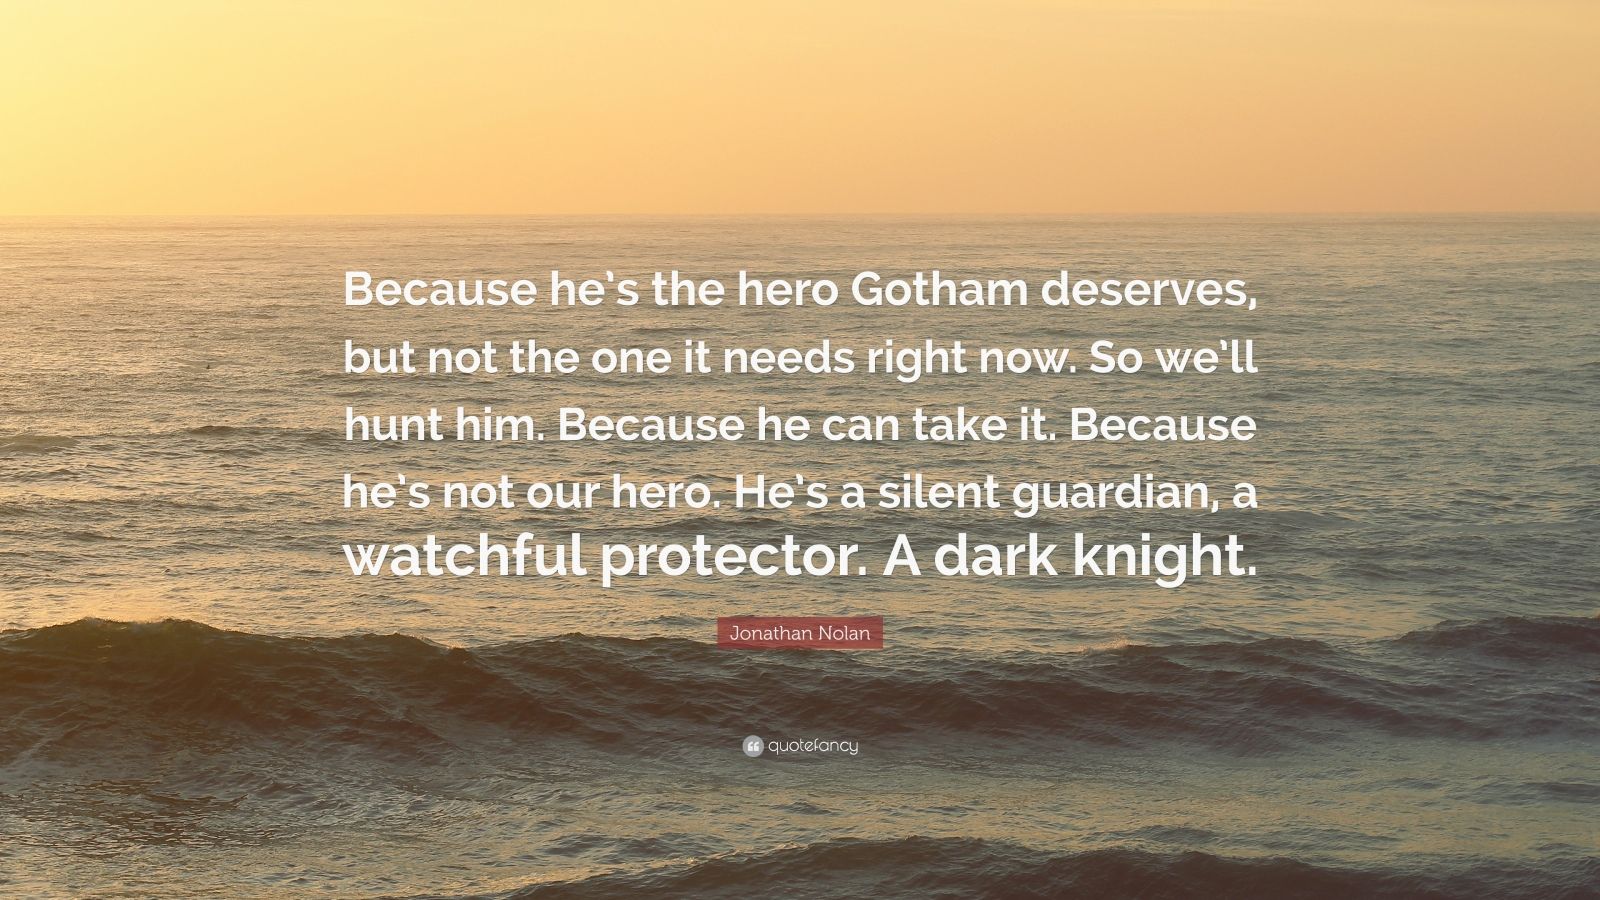 Jonathan Nolan Quote: "Because he's the hero Gotham deserves, but not the one it needs right now ...